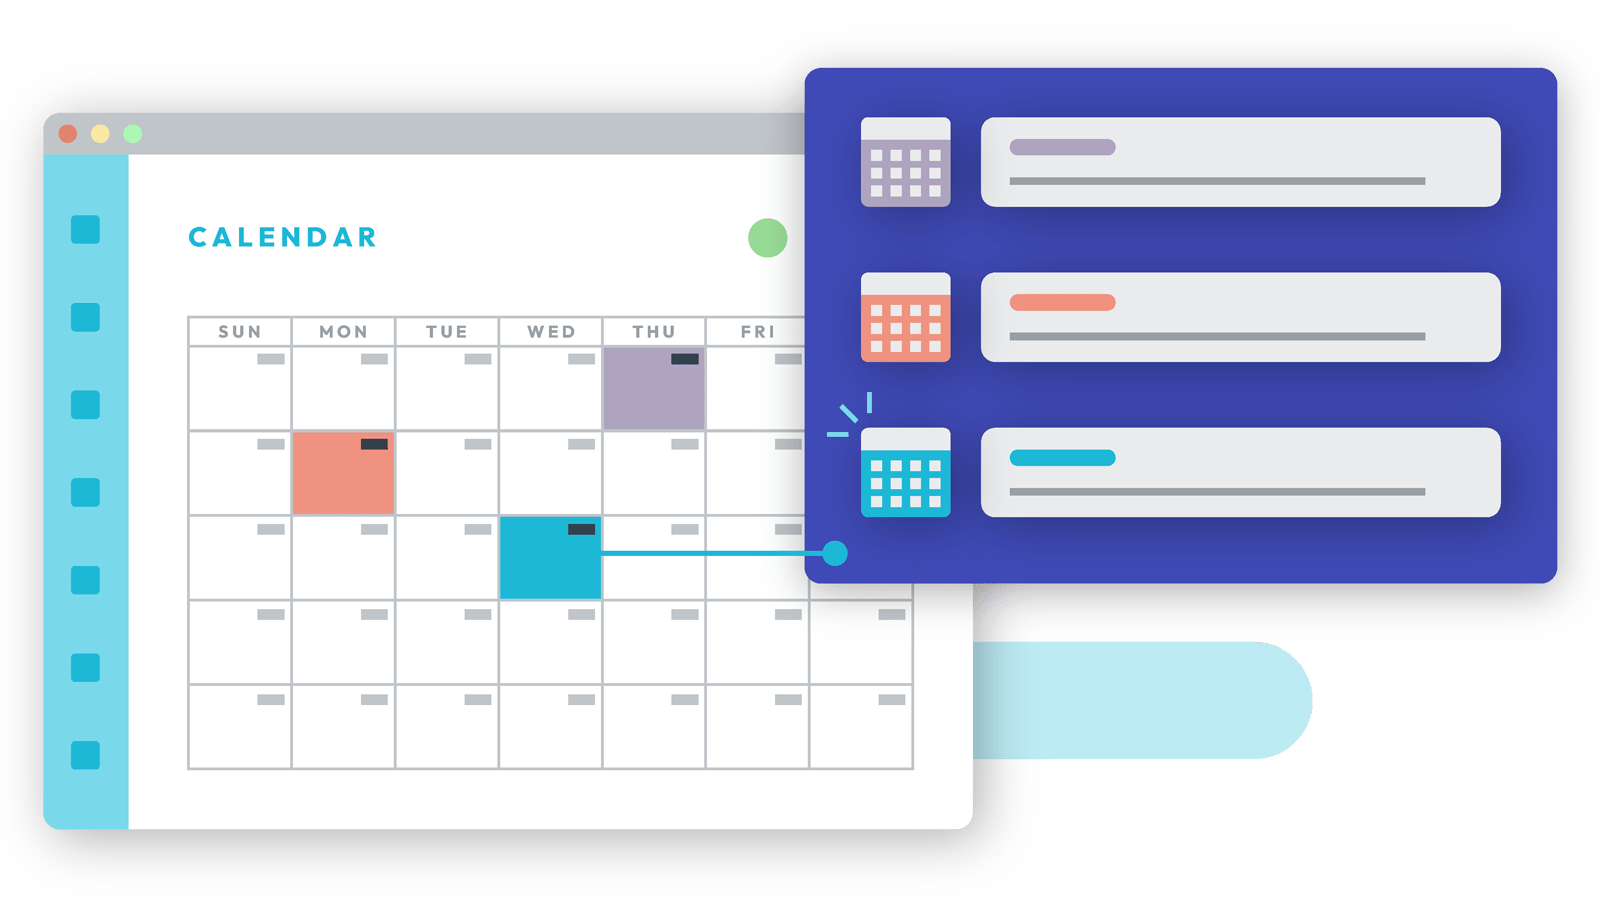 Calendar Events Example Image